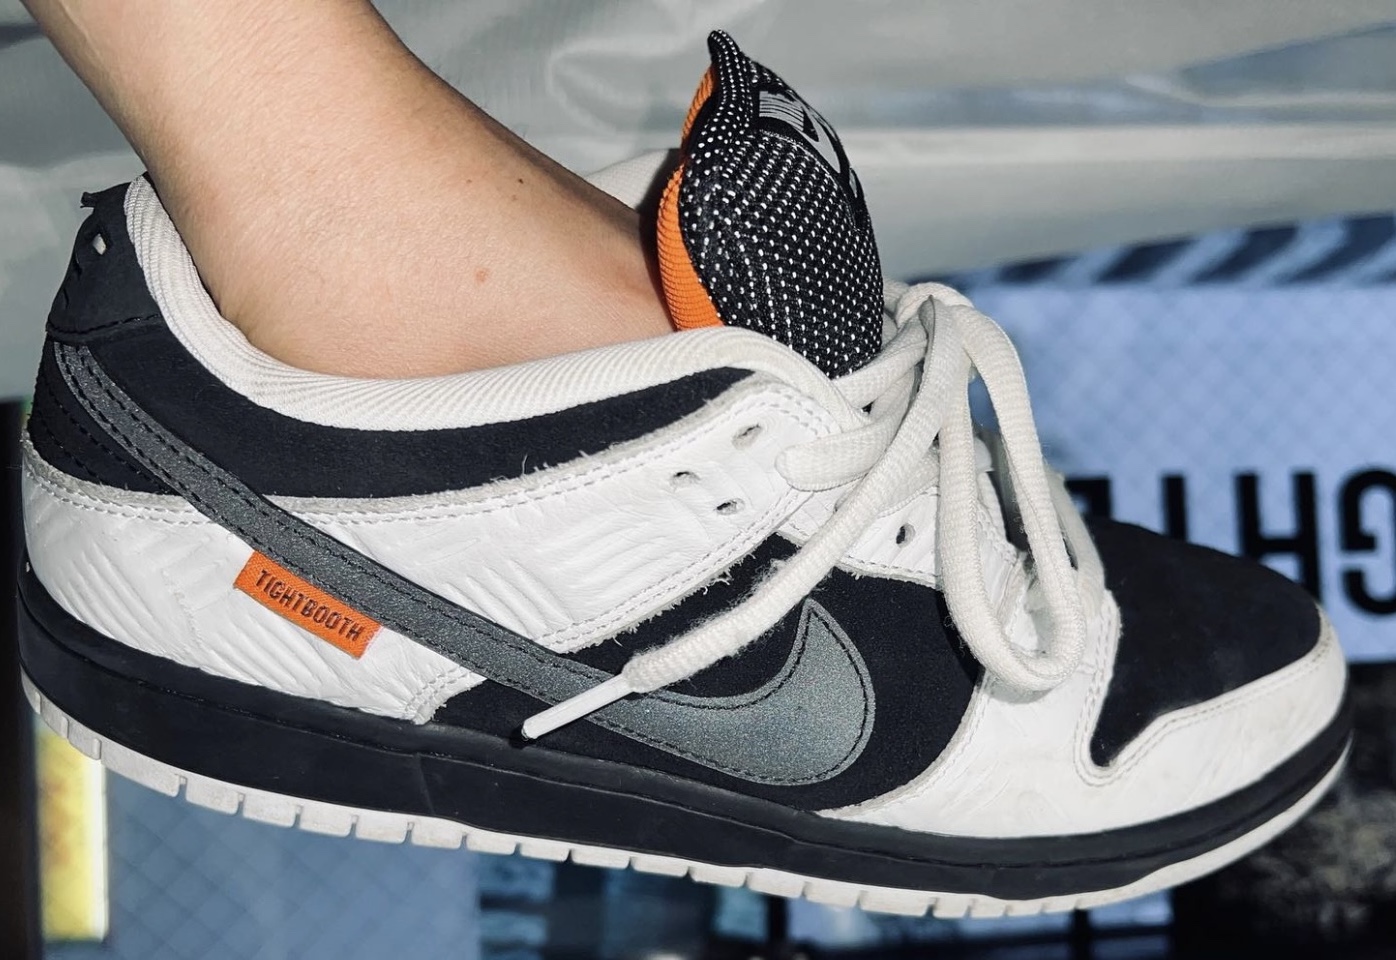 In-Hand Look at the TIGHTBOOTH x Nike SB Dunk Low